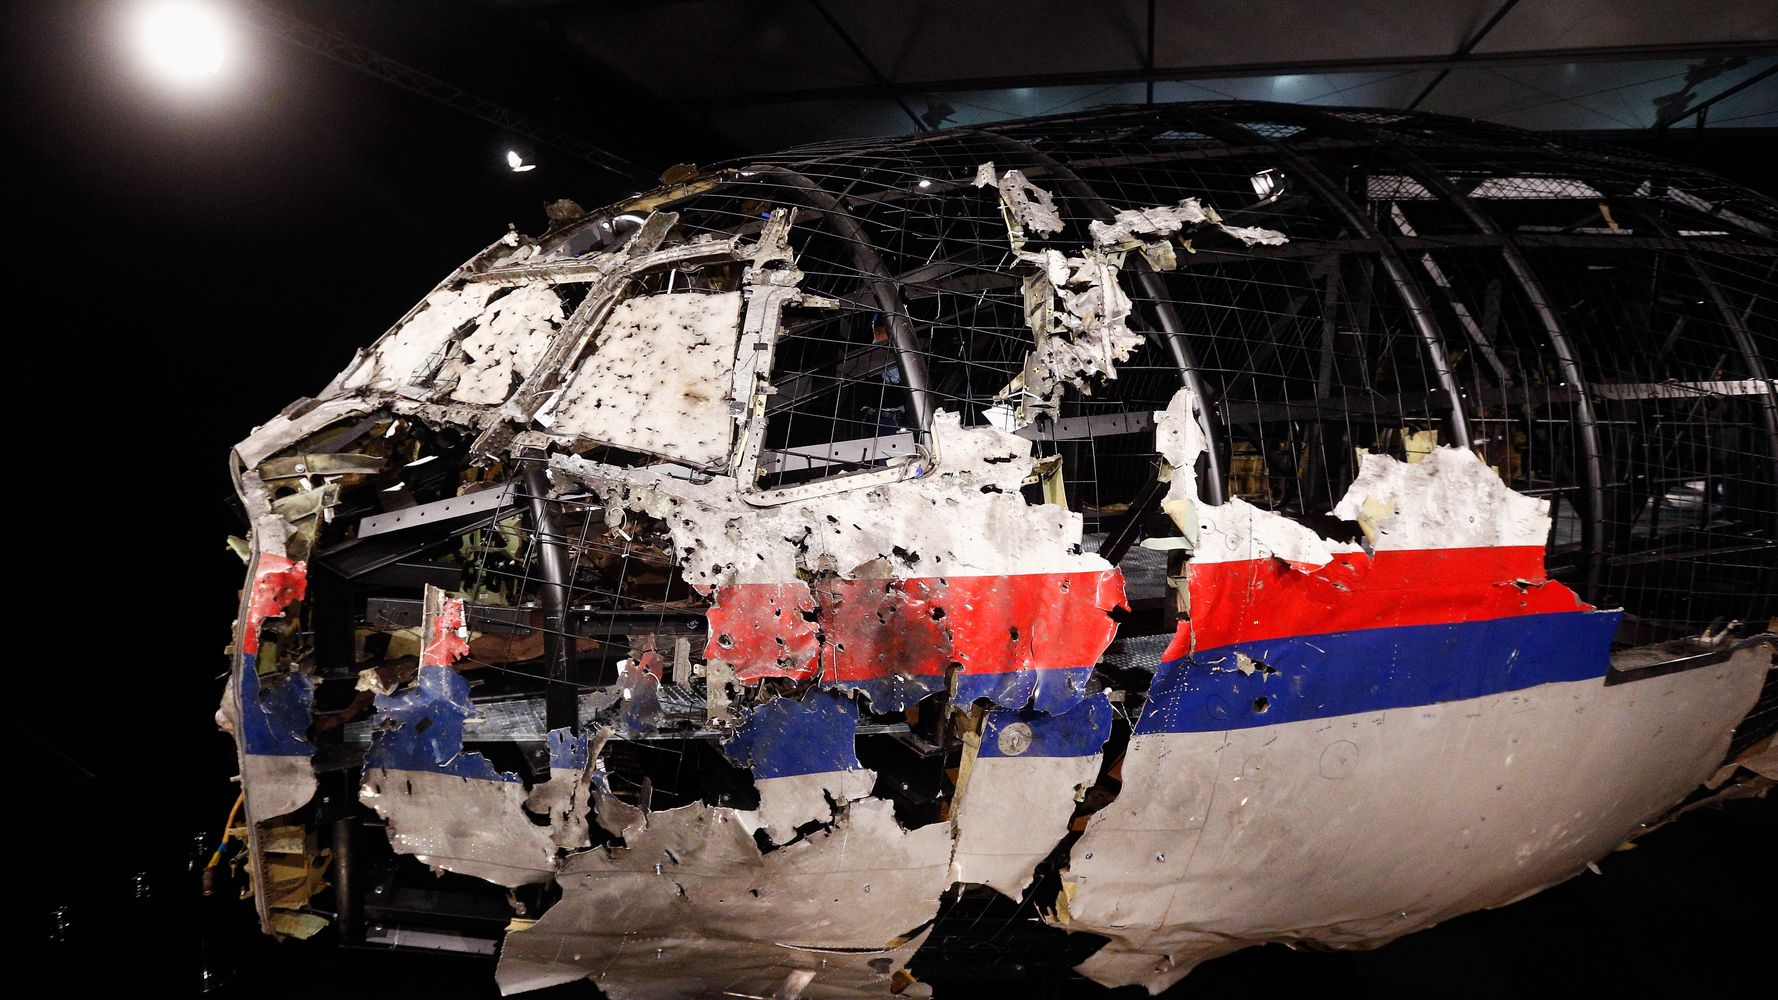 Mh17 who shot Identifying the